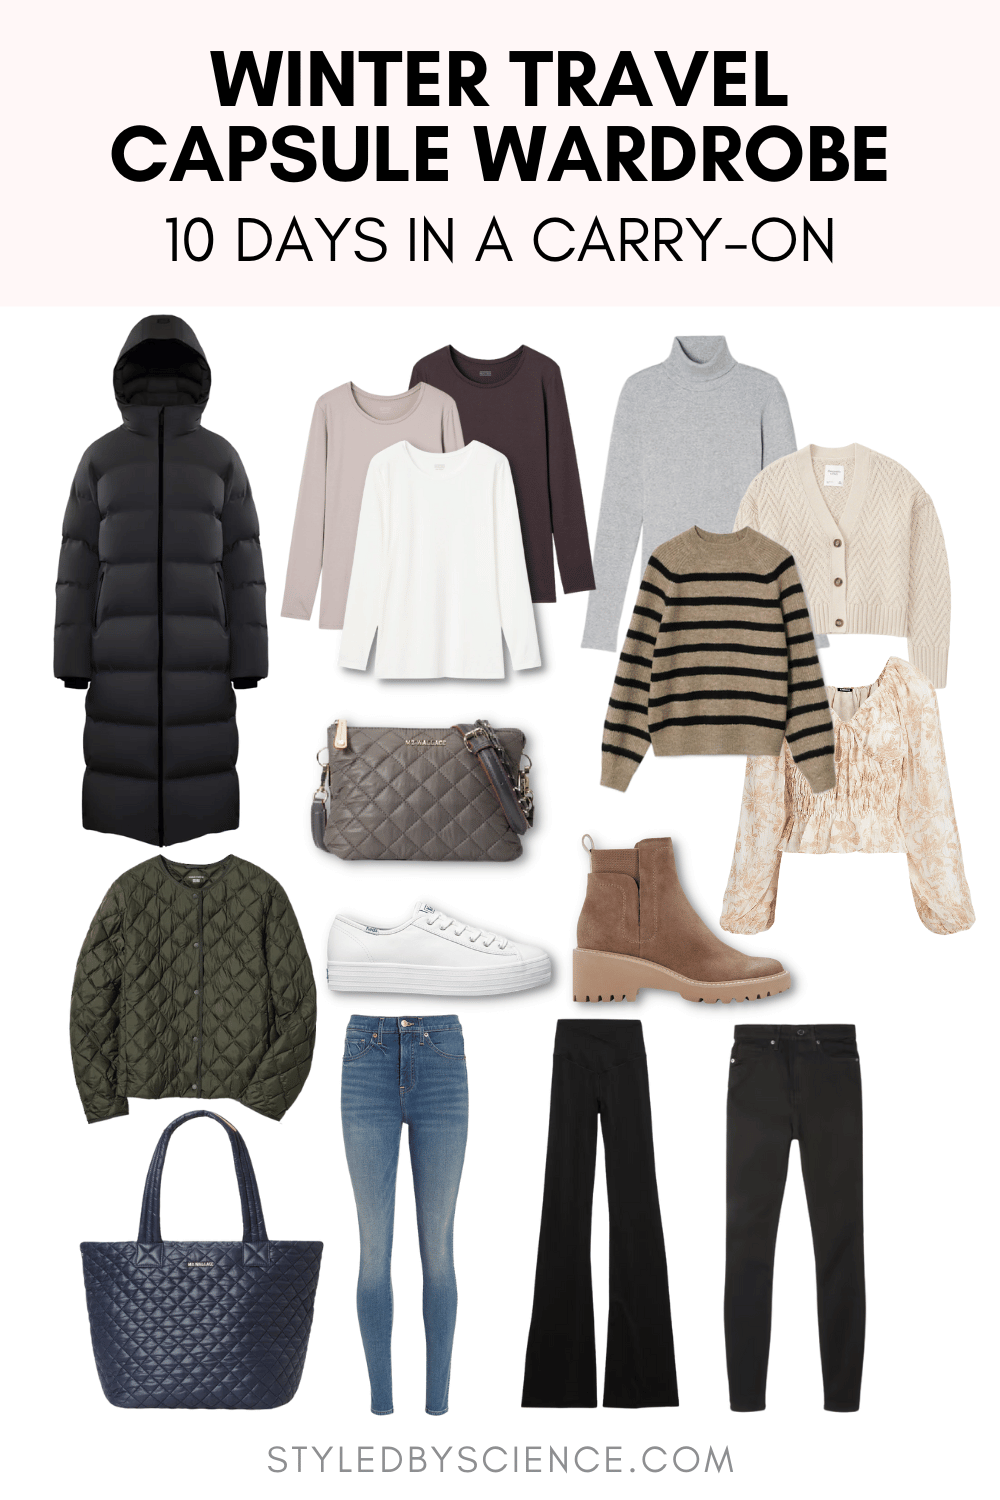 Winter Travel Capsule Wardrobe: How to Pack 10 Days in a Carry-On